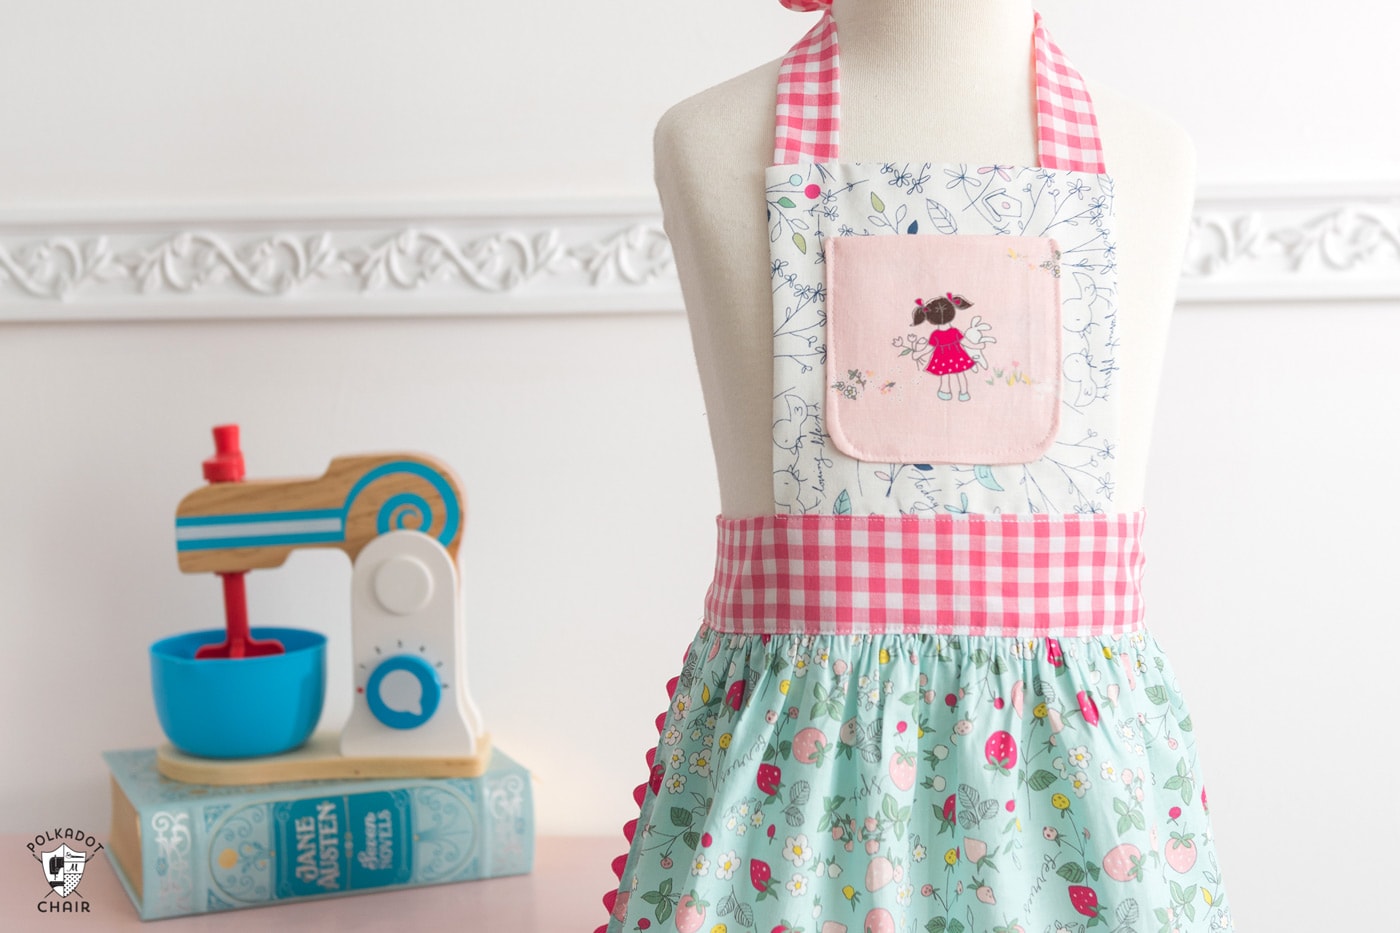 How to Sew Kids Aprons, a free Child's Apron Pattern